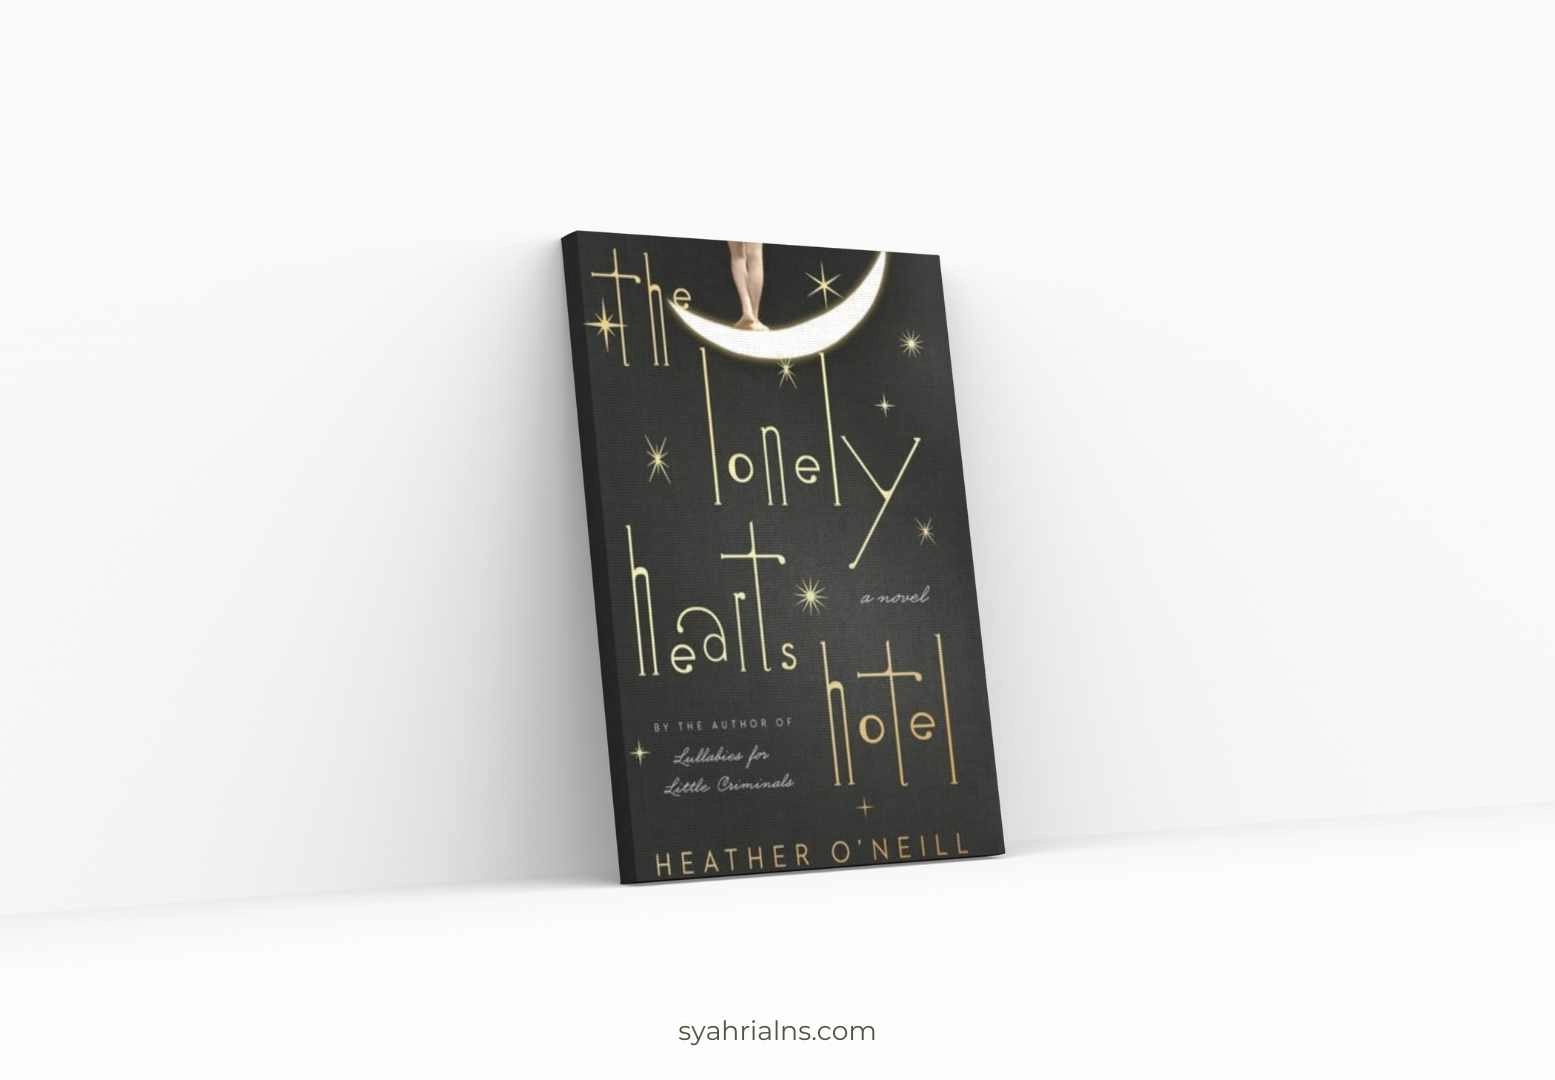 Lonely Hearts Hotel by Heather O’Neil